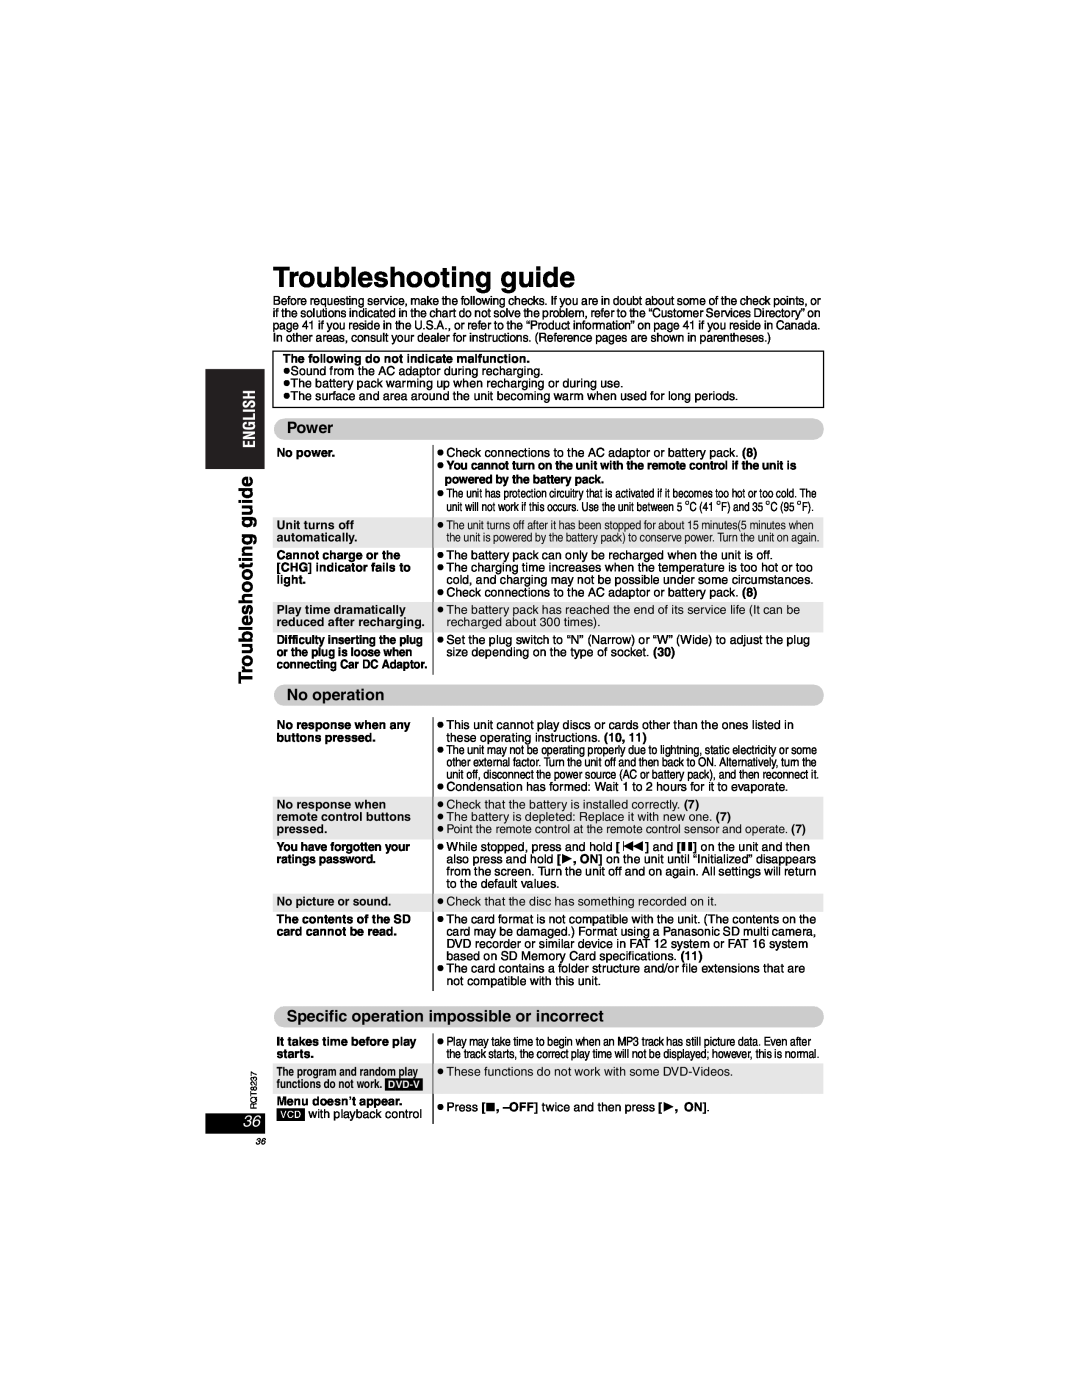 Panasonic DVD-LX97 Troubleshooting guide, Power, No operation, Specific operation impossible or incorrect, starts 